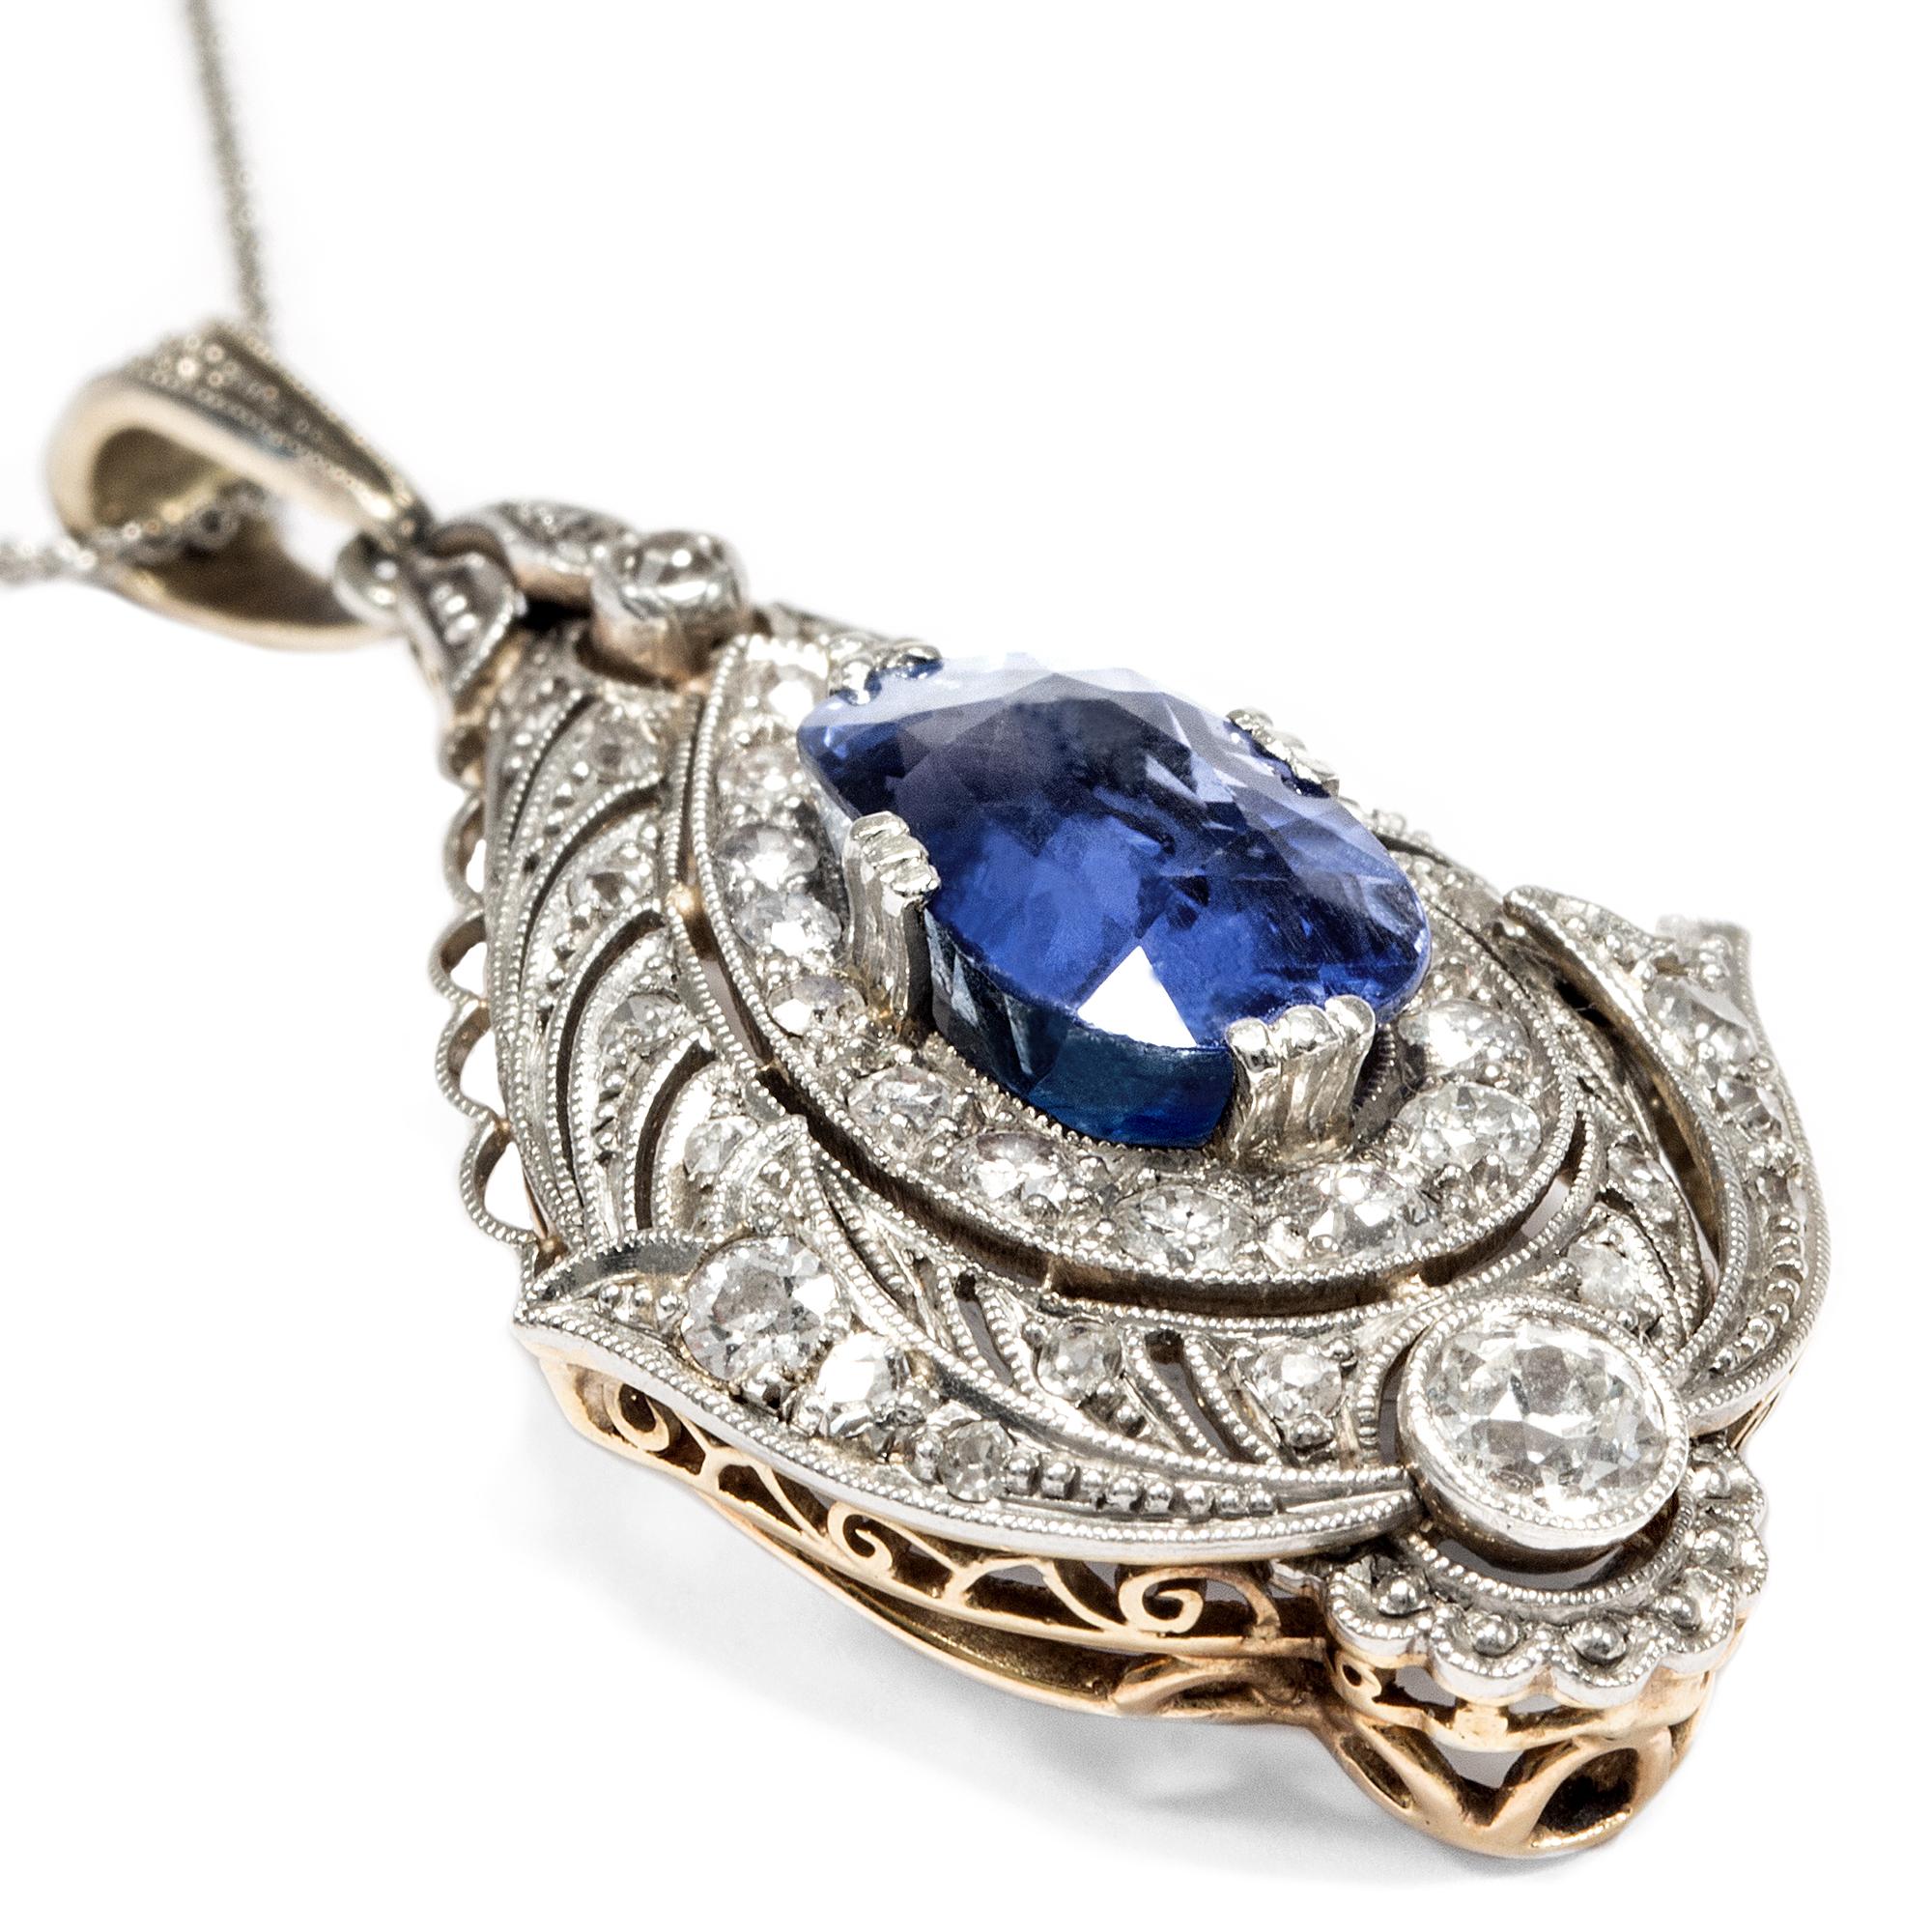 This pendant is a characteristic jewel of the Belle Époque: its fineness and precision and craftsmanship, as well as the assorted, precious materials are typical of this time which placed beauty above all else. In the centre of this spectacular